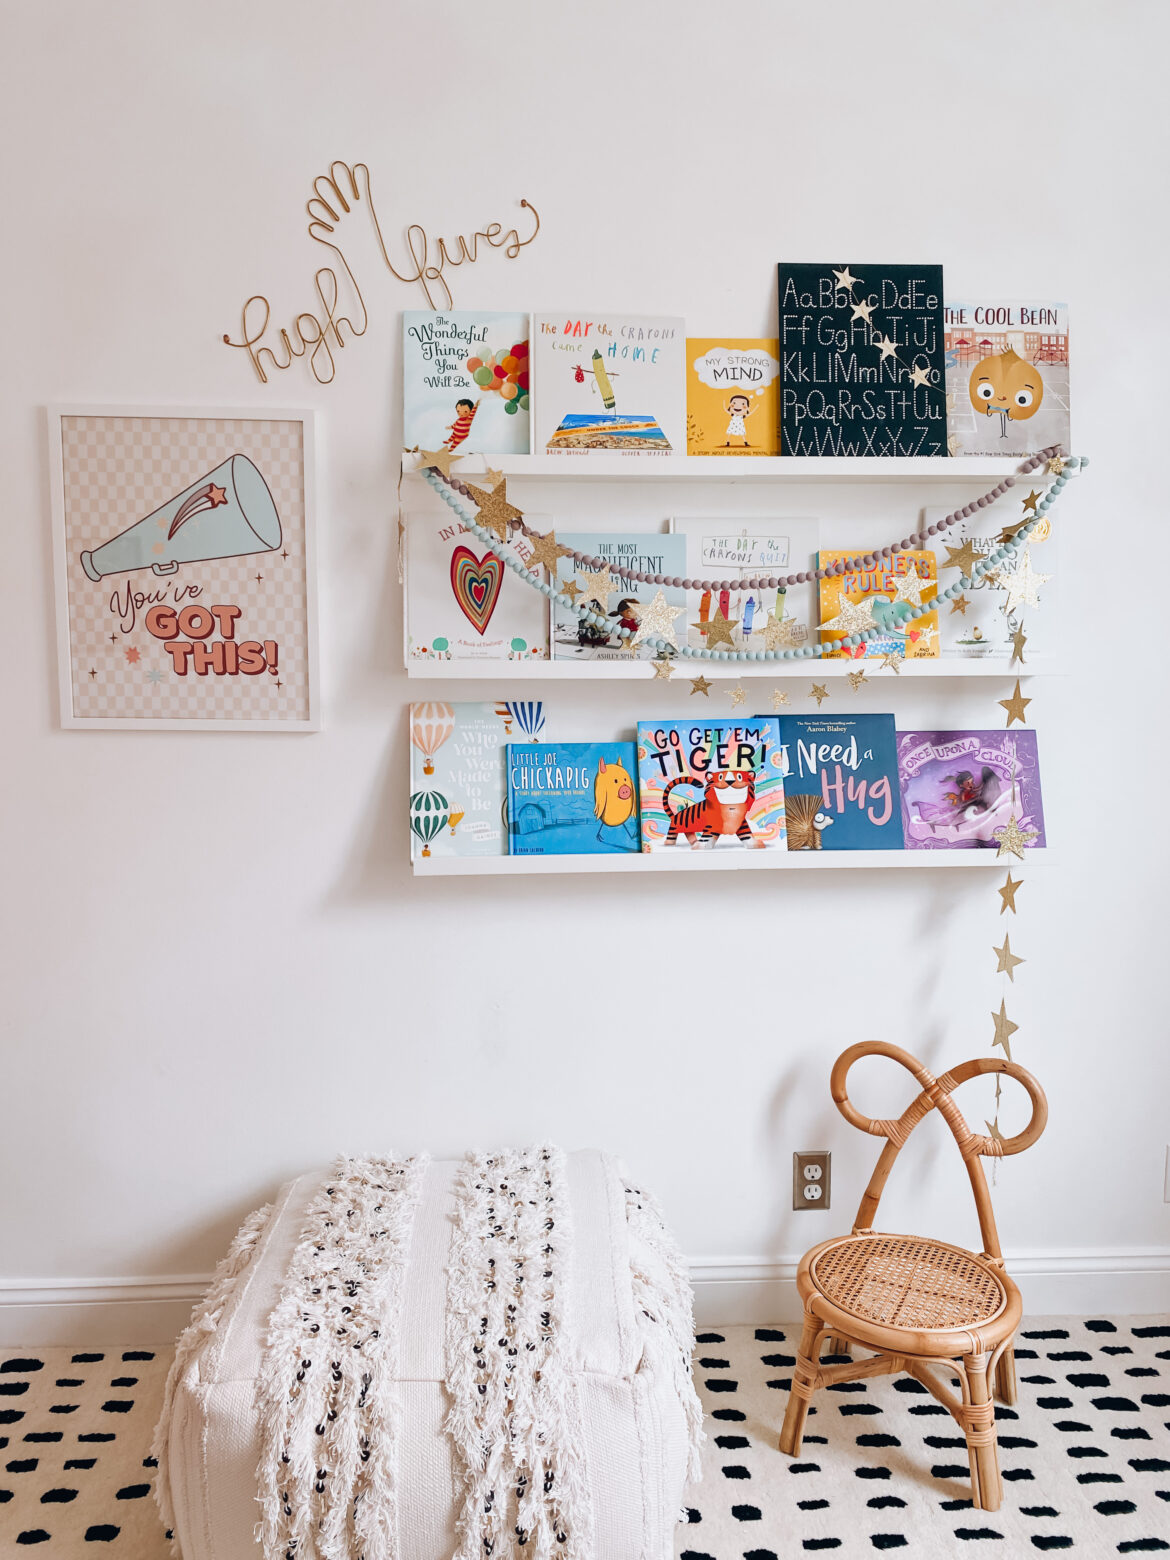 Back to School Bookshelves for Kids displayed on Ikea picture ledges for easy access and fun style